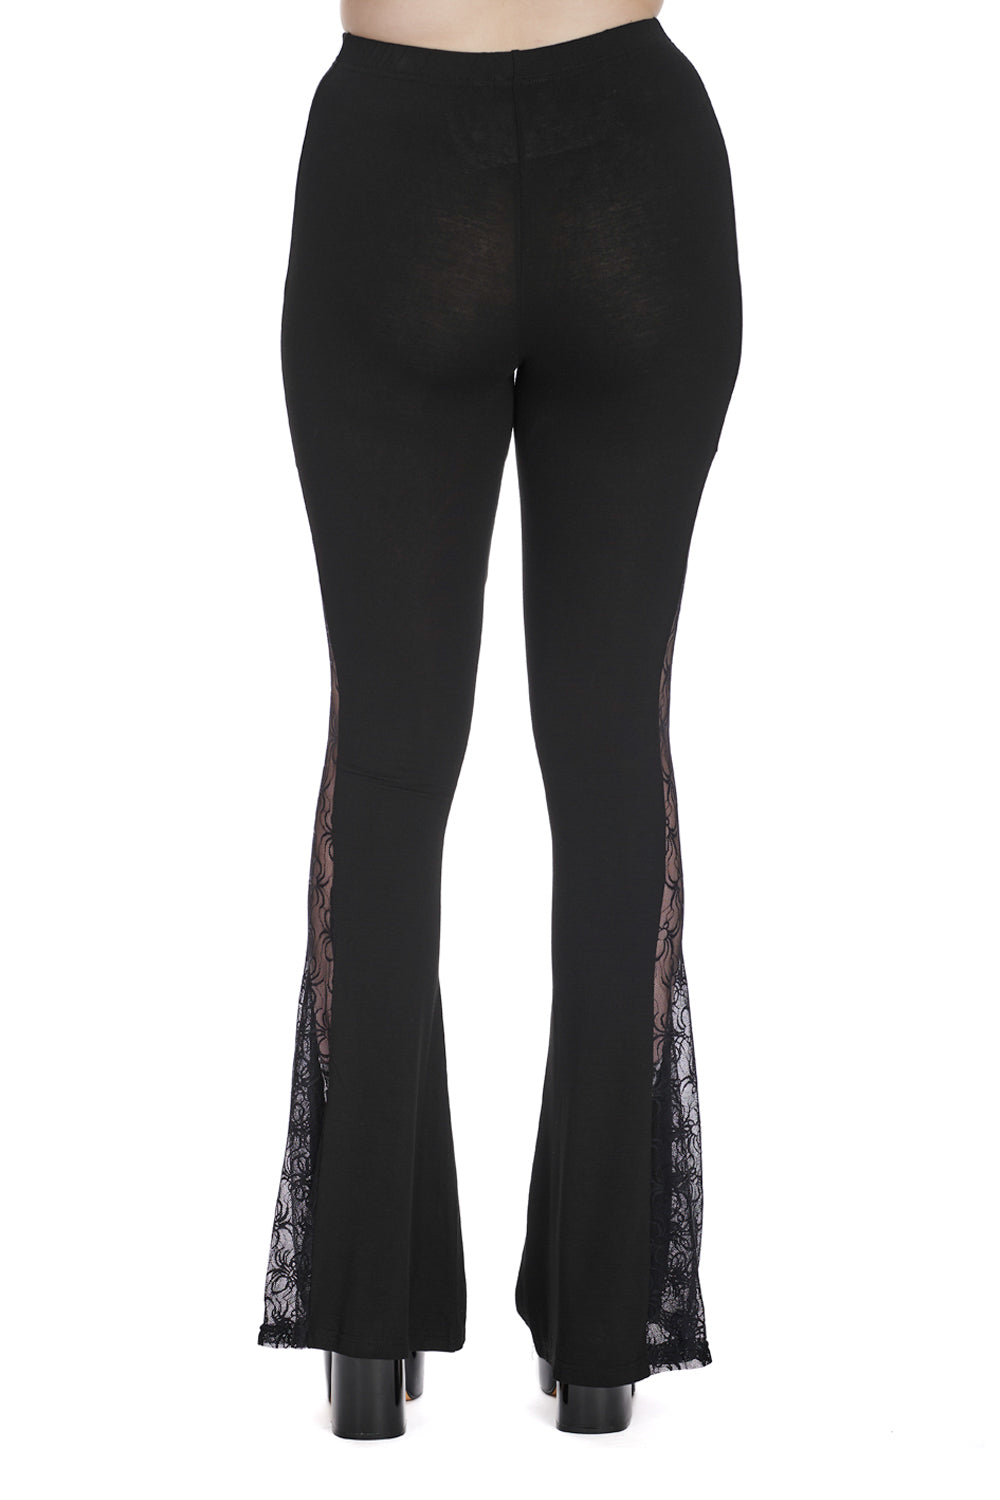 Banned Alternative DECAY GLAM LACE TROUSERS